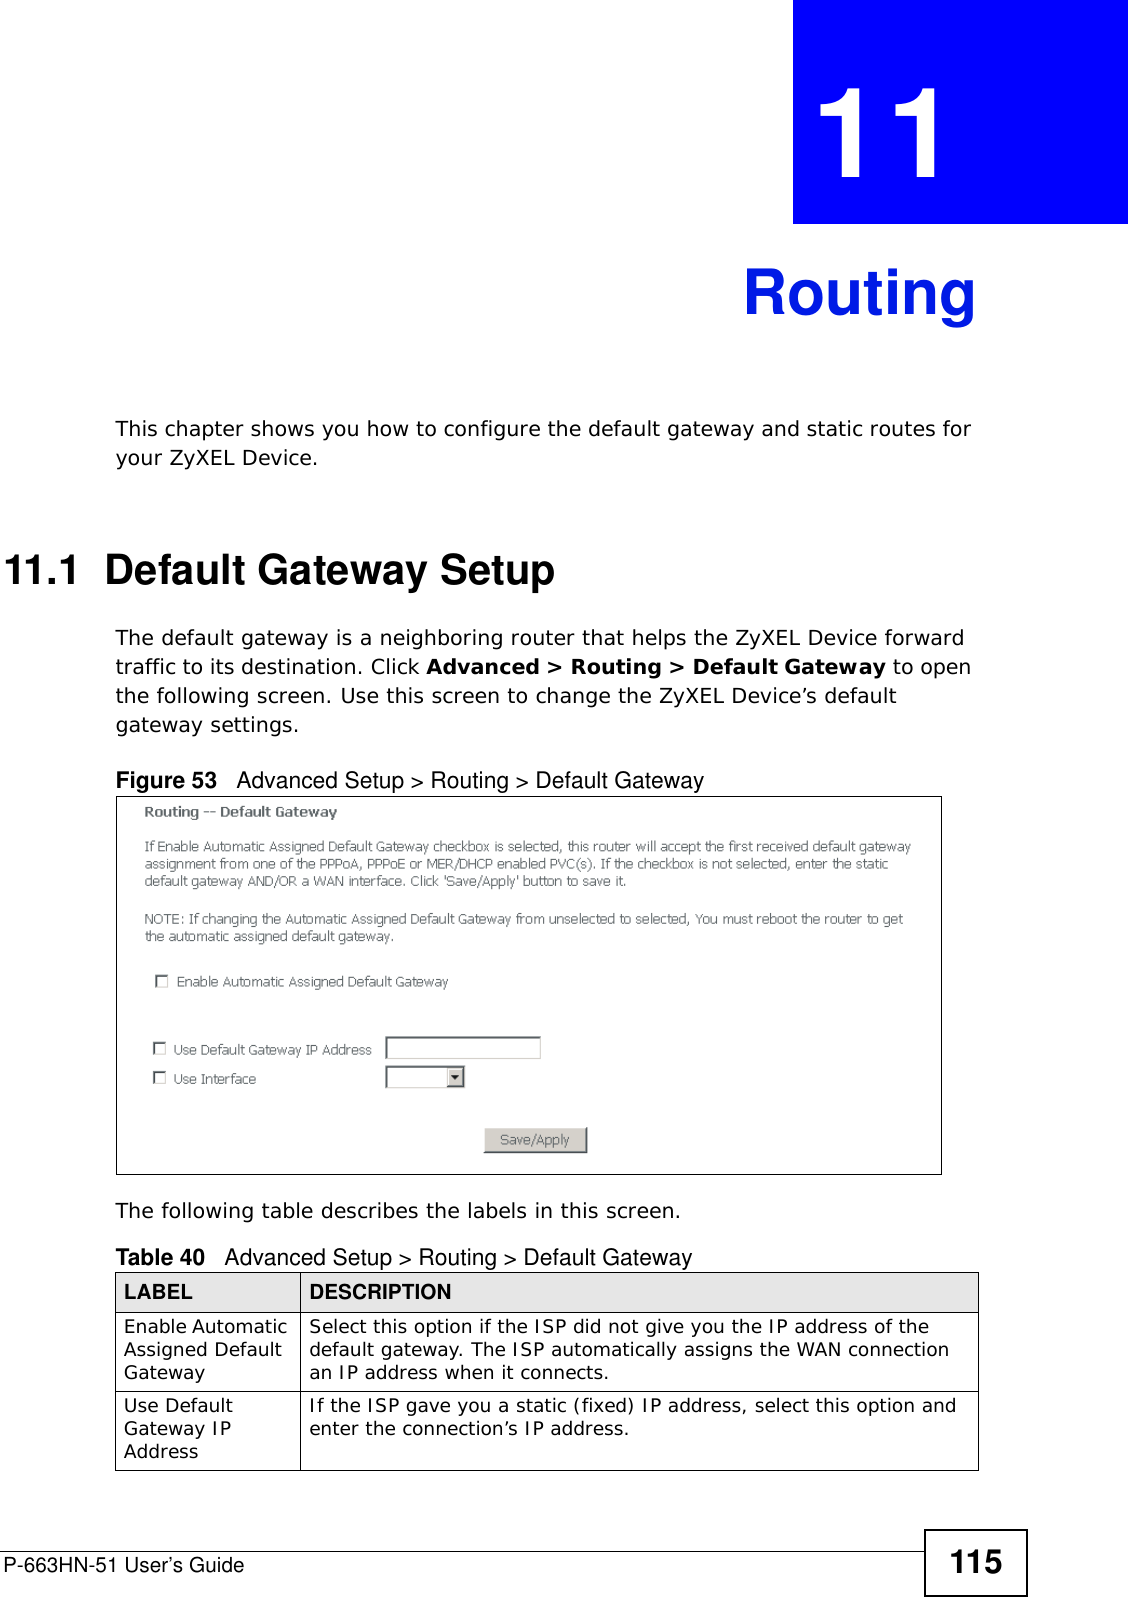 P-663HN-51 User’s Guide 115CHAPTER  11 RoutingThis chapter shows you how to configure the default gateway and static routes for your ZyXEL Device.11.1  Default Gateway SetupThe default gateway is a neighboring router that helps the ZyXEL Device forward traffic to its destination. Click Advanced &gt; Routing &gt; Default Gateway to open the following screen. Use this screen to change the ZyXEL Device’s default gateway settings.Figure 53   Advanced Setup &gt; Routing &gt; Default GatewayThe following table describes the labels in this screen.  Table 40   Advanced Setup &gt; Routing &gt; Default GatewayLABEL DESCRIPTIONEnable Automatic Assigned Default Gateway Select this option if the ISP did not give you the IP address of the default gateway. The ISP automatically assigns the WAN connection an IP address when it connects.Use Default Gateway IP AddressIf the ISP gave you a static (fixed) IP address, select this option and enter the connection’s IP address.  